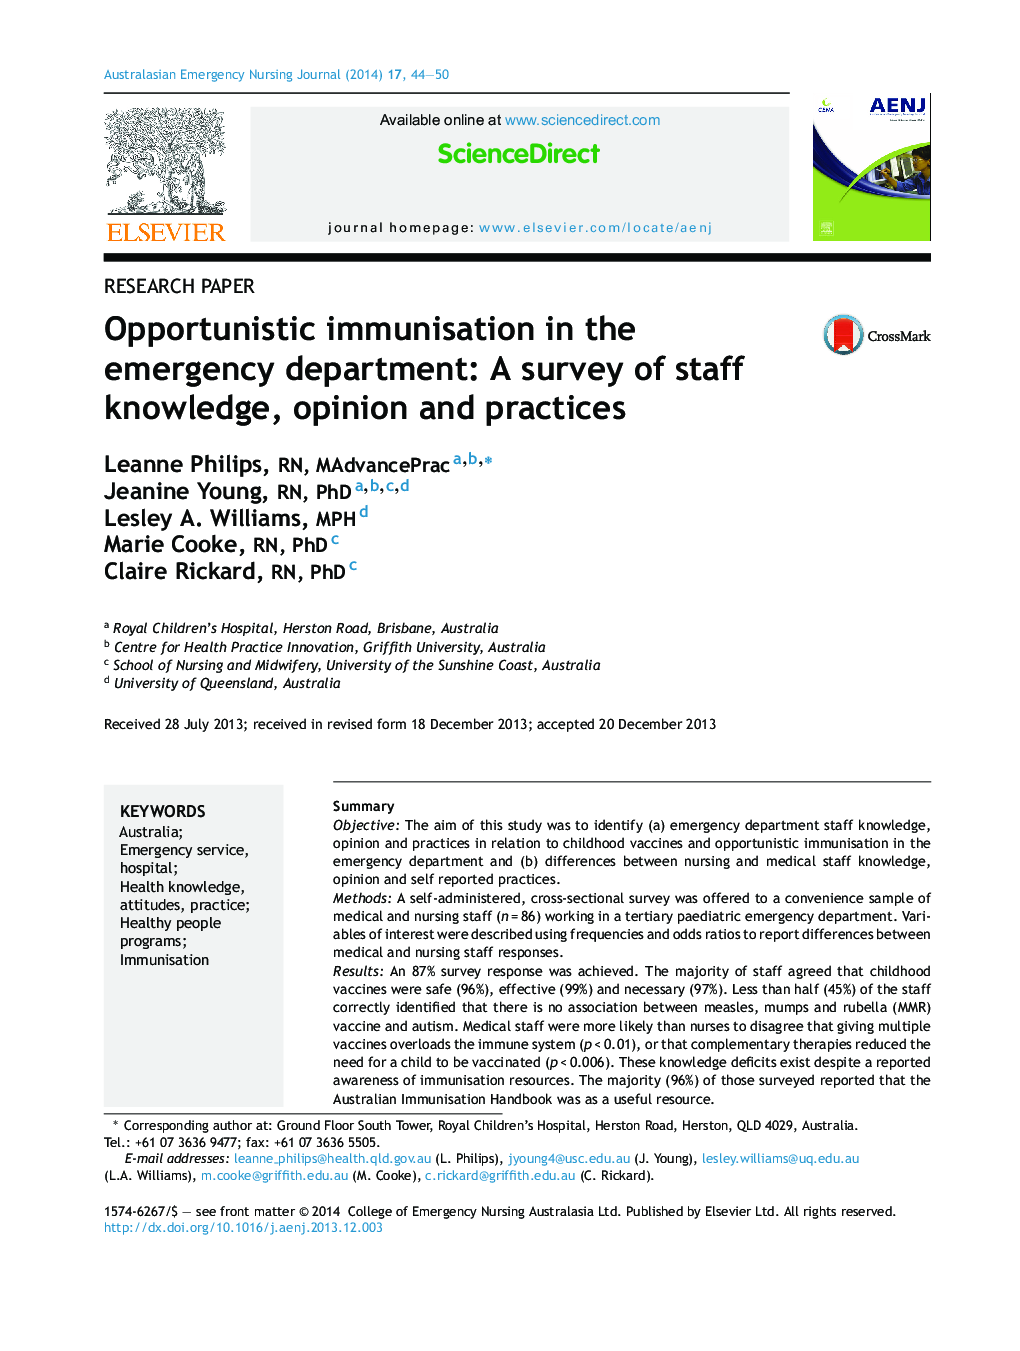 Opportunistic immunisation in the emergency department: A survey of staff knowledge, opinion and practices